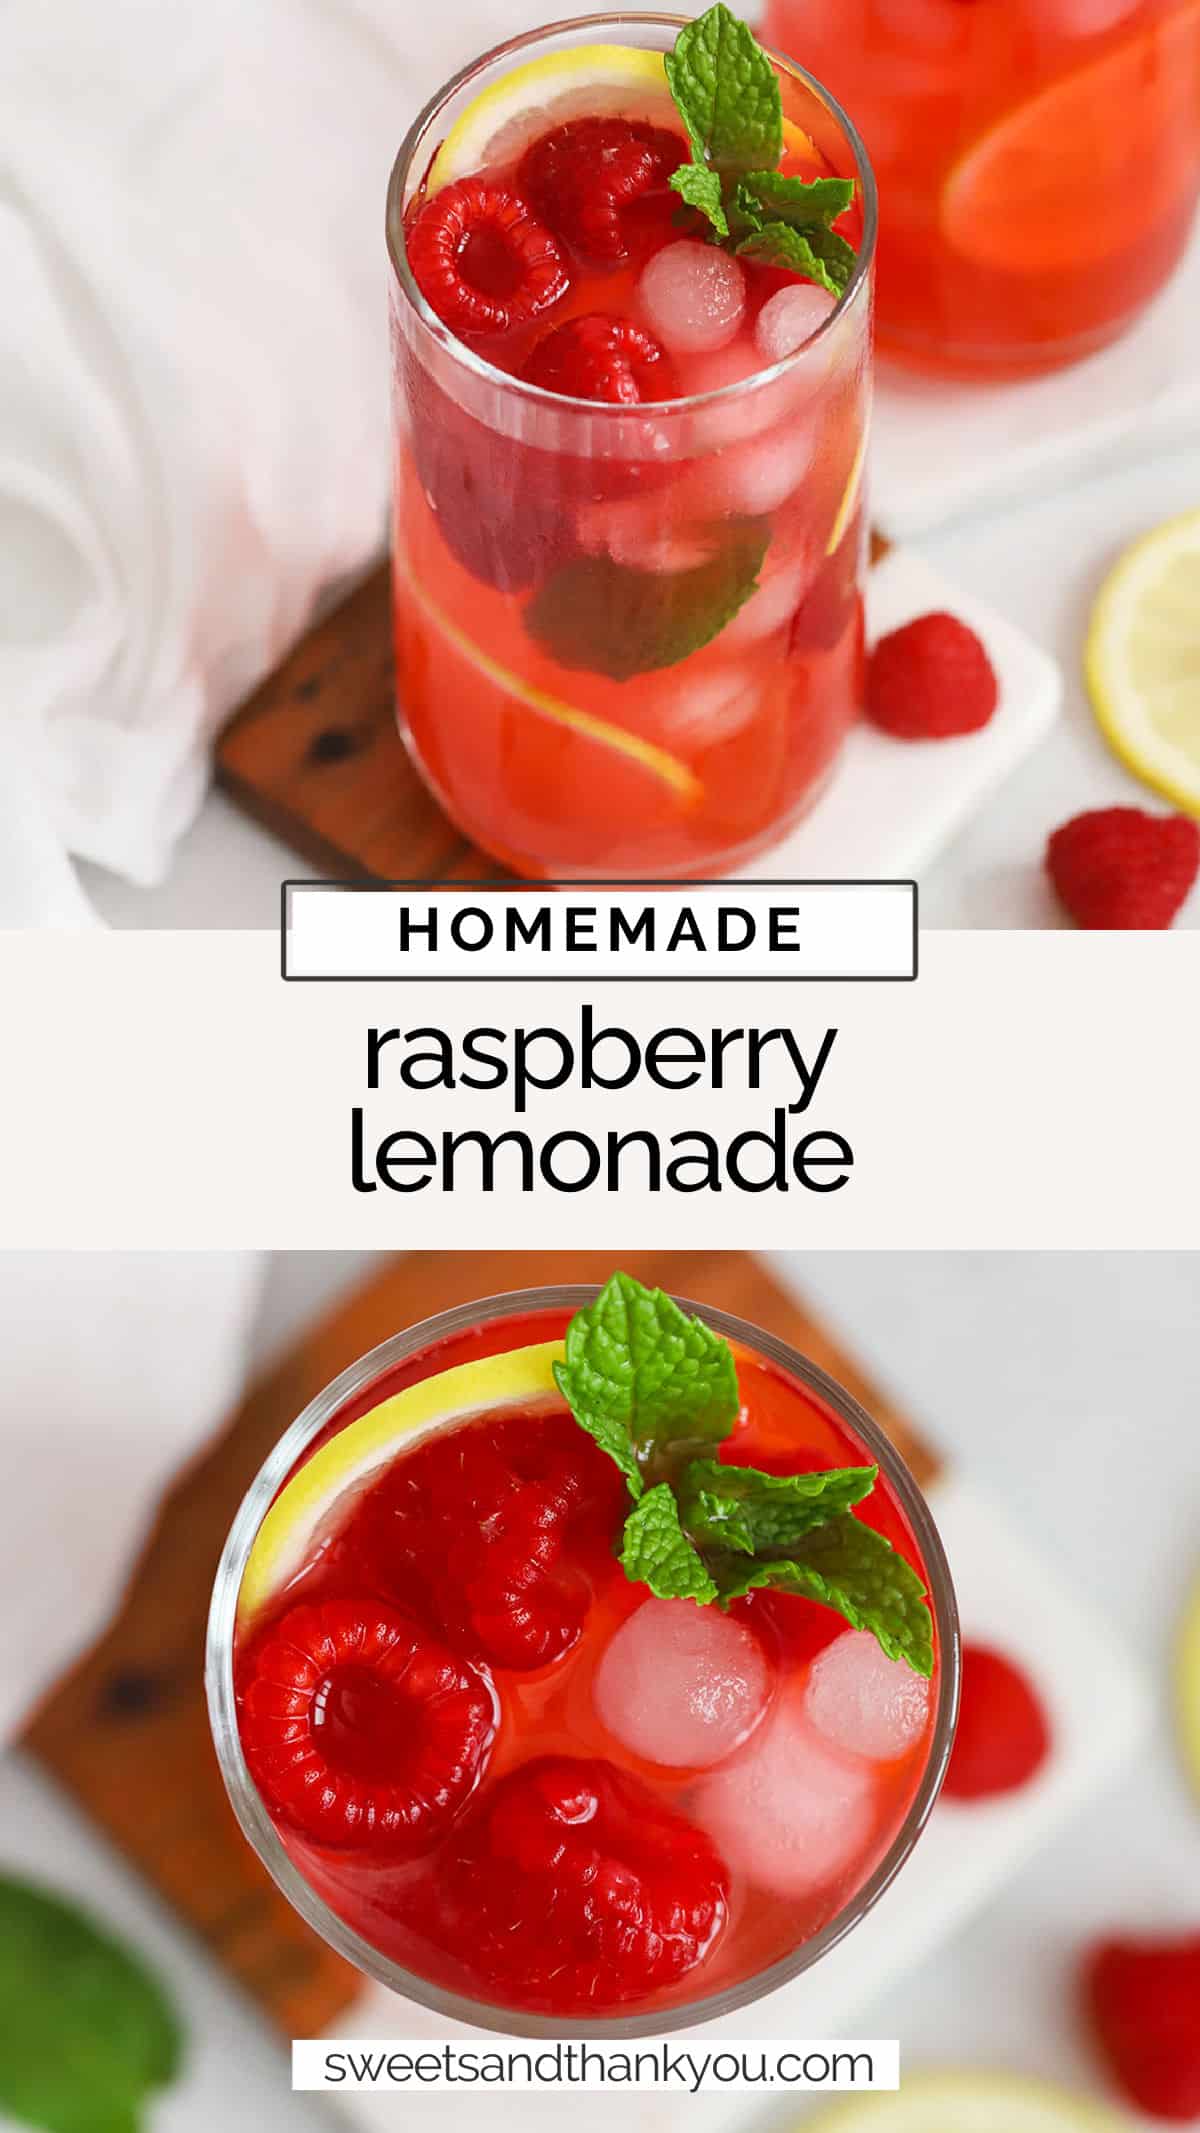 This easy homemade raspberry lemonade recipe is the perfect drink to cool off with! Made from simple ingredients, this pretty pink drink is perfect for parties and celebrations of all kinds. // pink lemonade / raspberry lemonade from scratch / raspberry lemonade with real lemon / 4 ingredient raspberry lemonade / summer mocktail / summer drink recipe / pink drink recipe / pink mocktail / valentines day mocktail / raspberry mocktail / from scratch raspberry lemonade